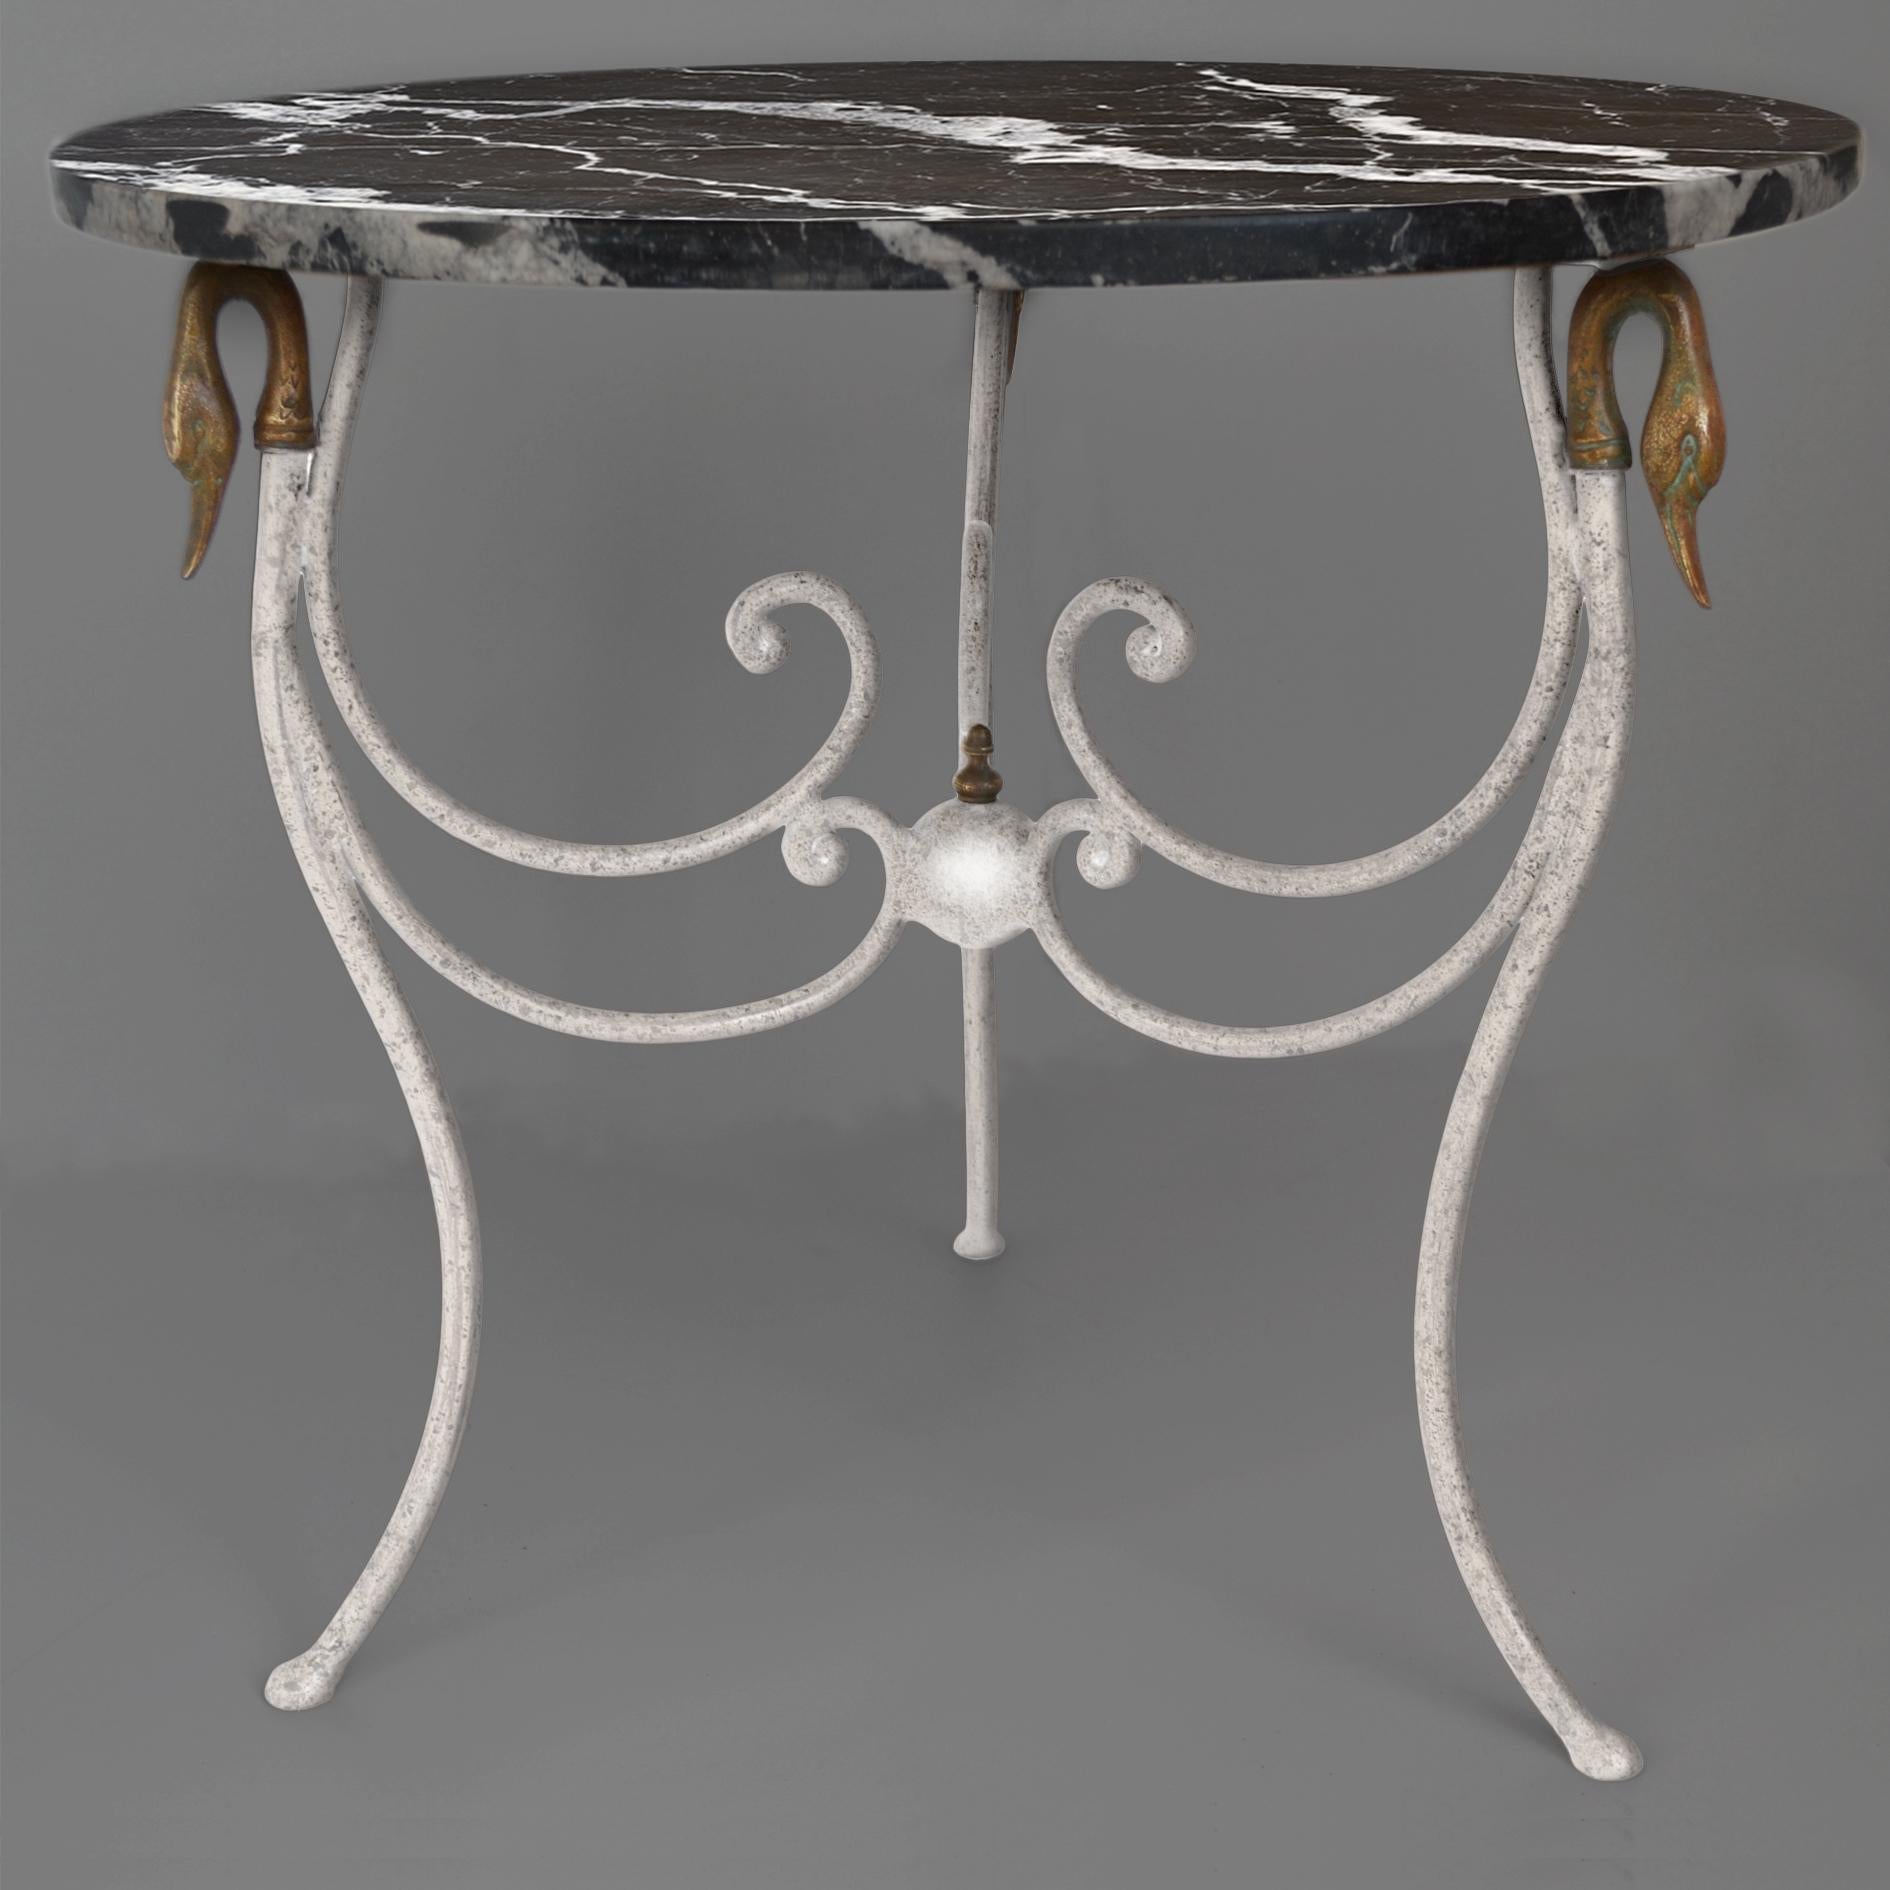 Art Nouveau Black Side Table Black Marble-Top Iron Base Gold Leaf Finish handmade in Italy For Sale